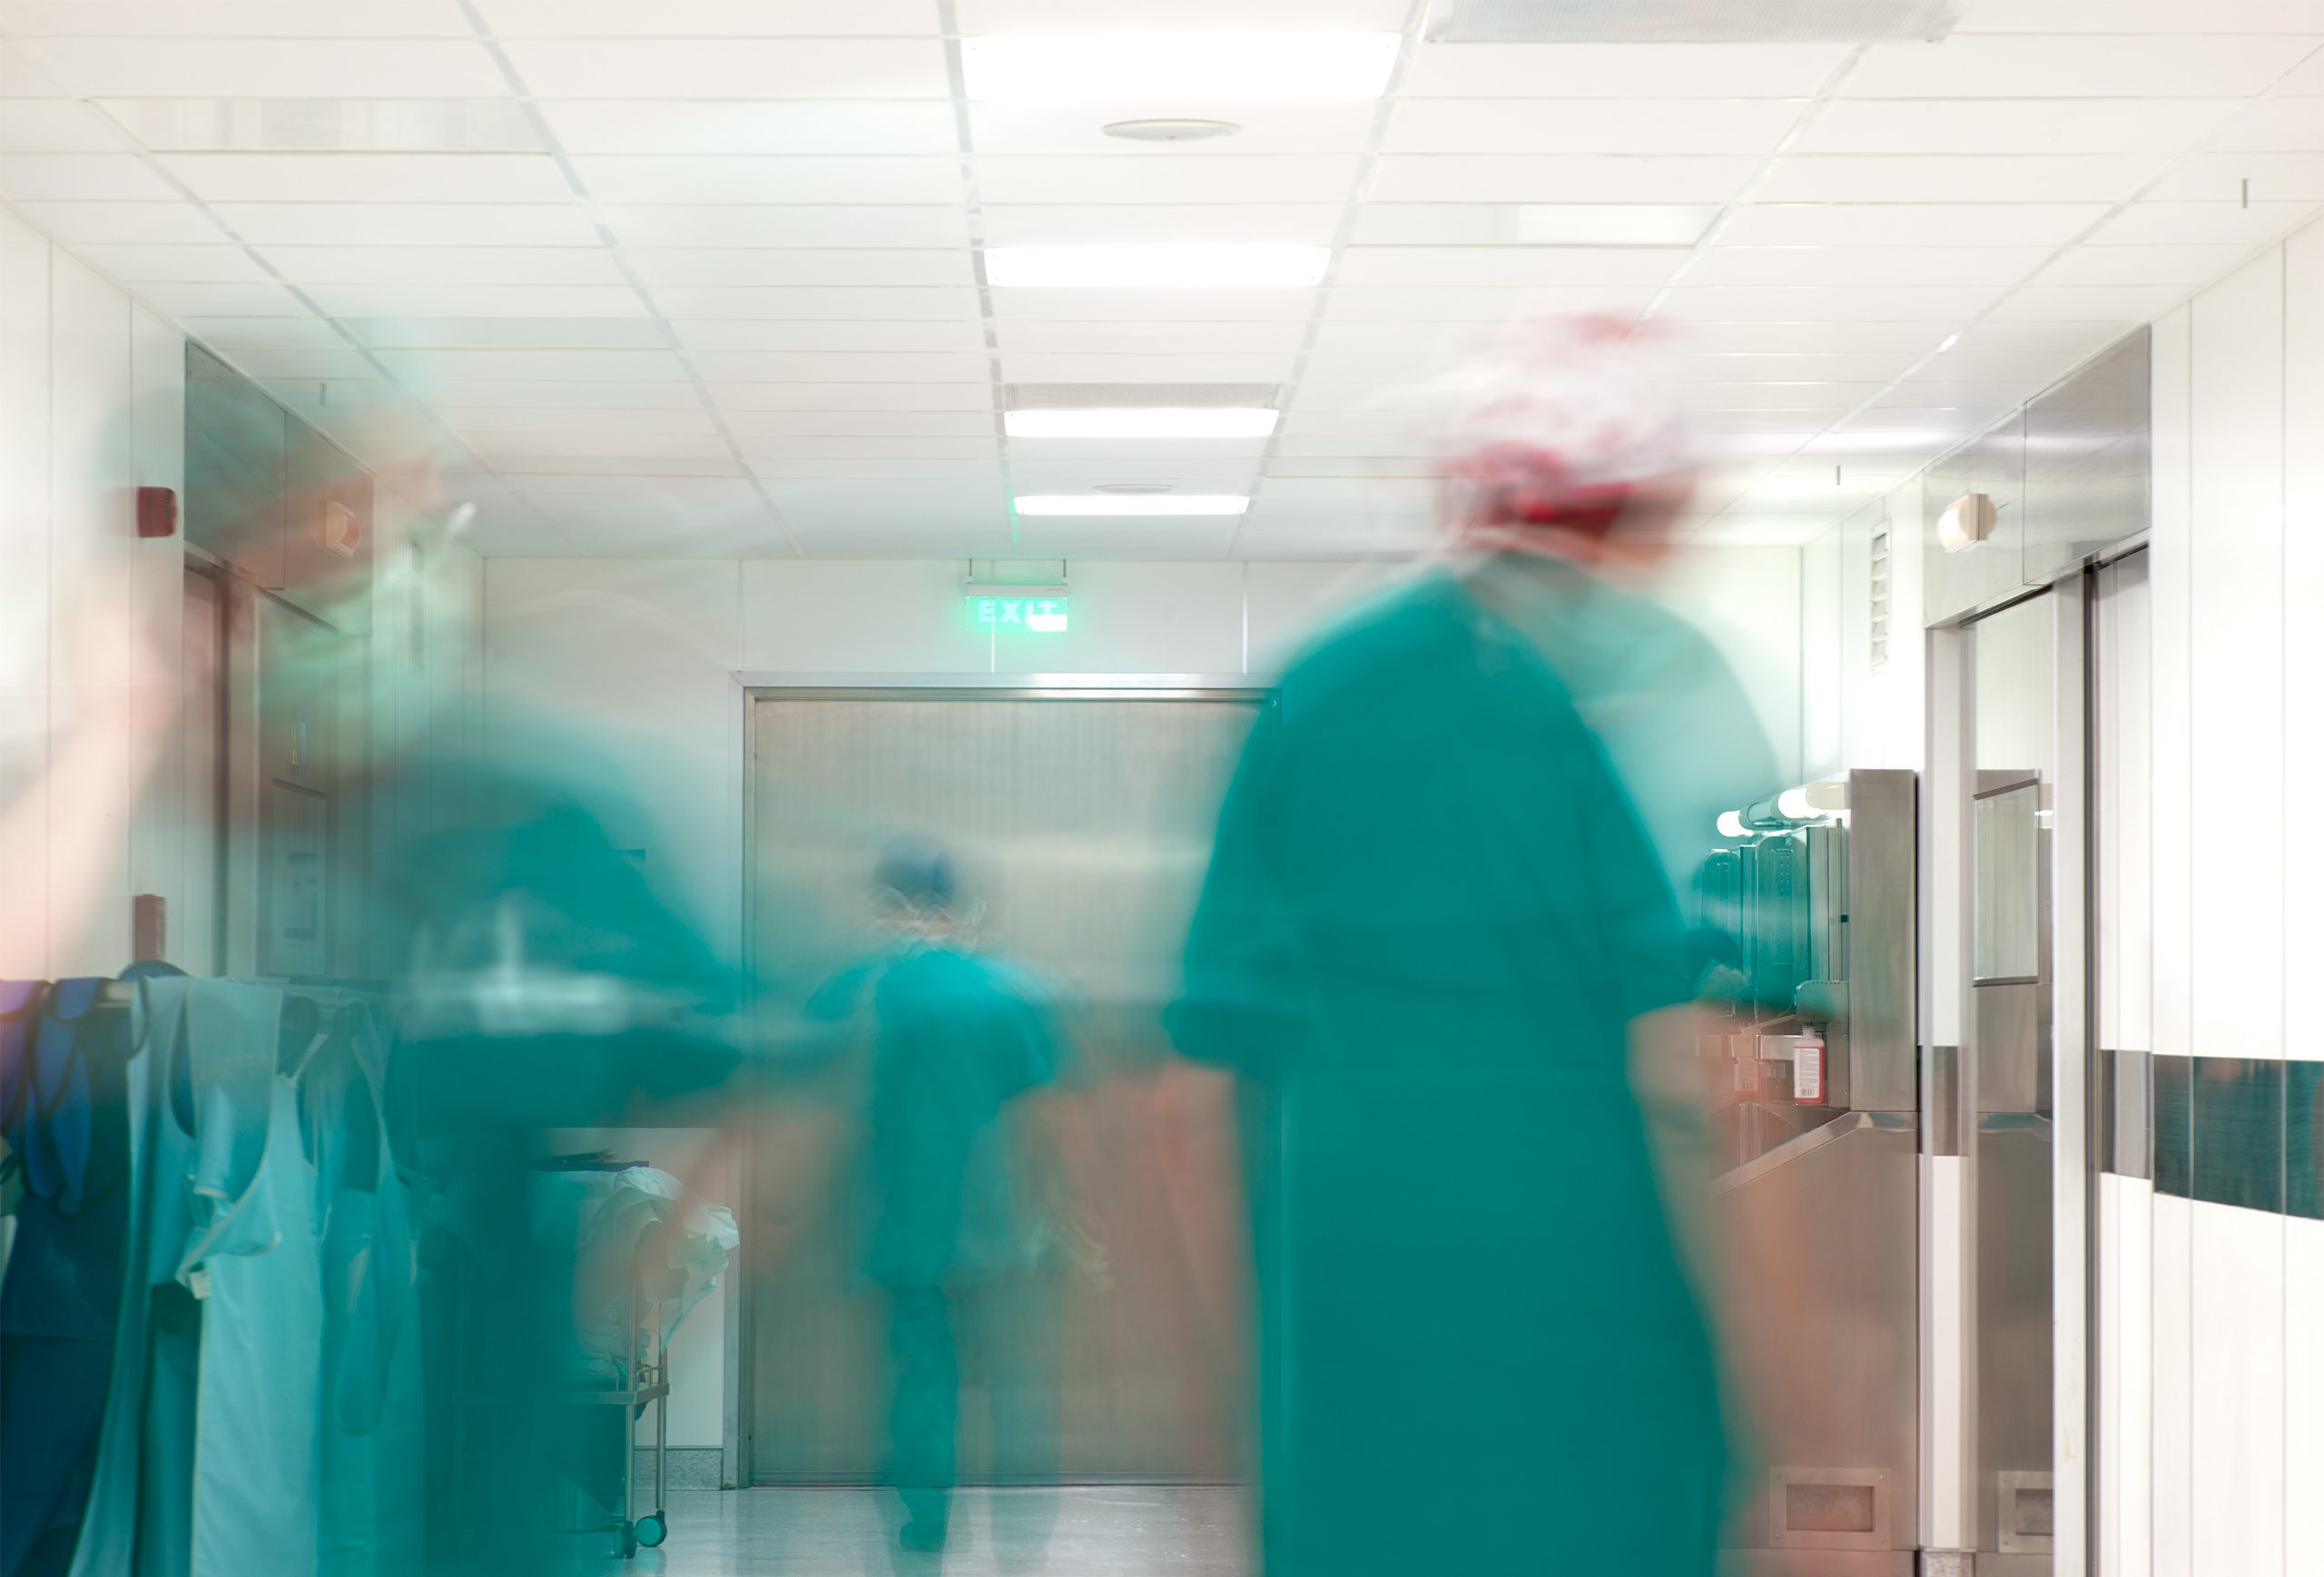 Blurred figures of doctors with medical uniforms in hospital